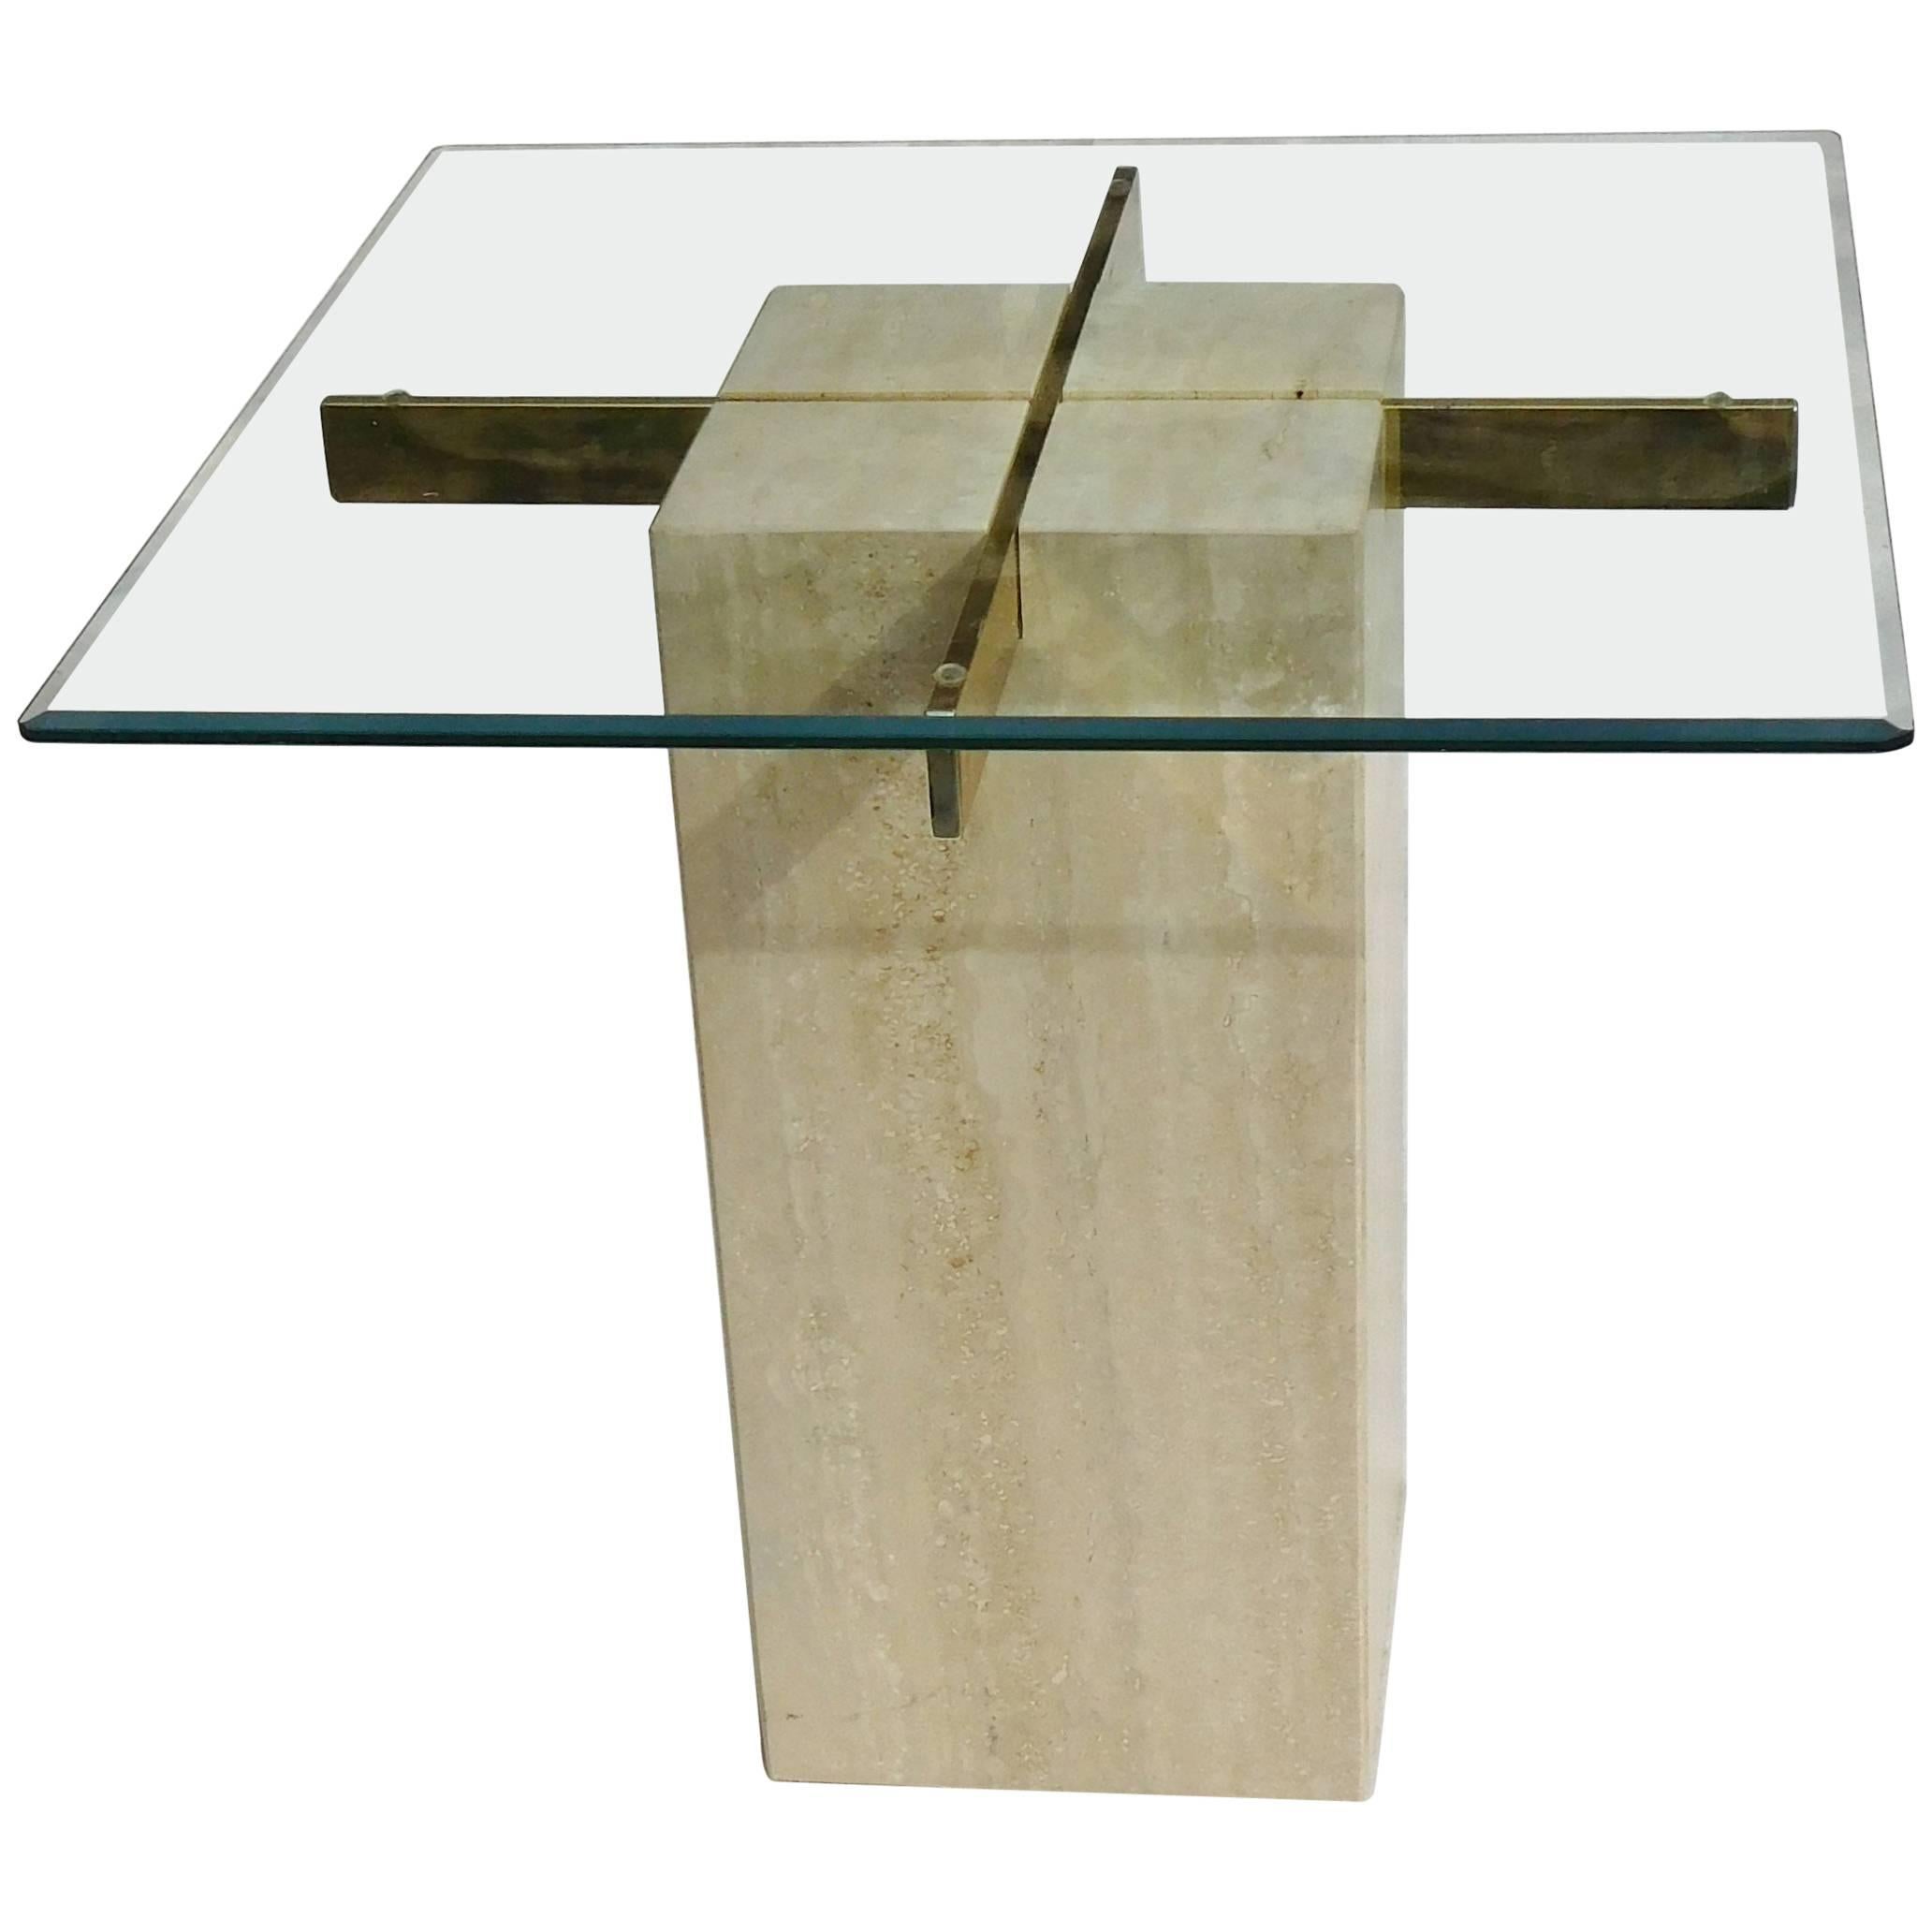 Artedi Vintage Occasional Table in Travertine, Brass, Beveled Glass, circa 1985 For Sale